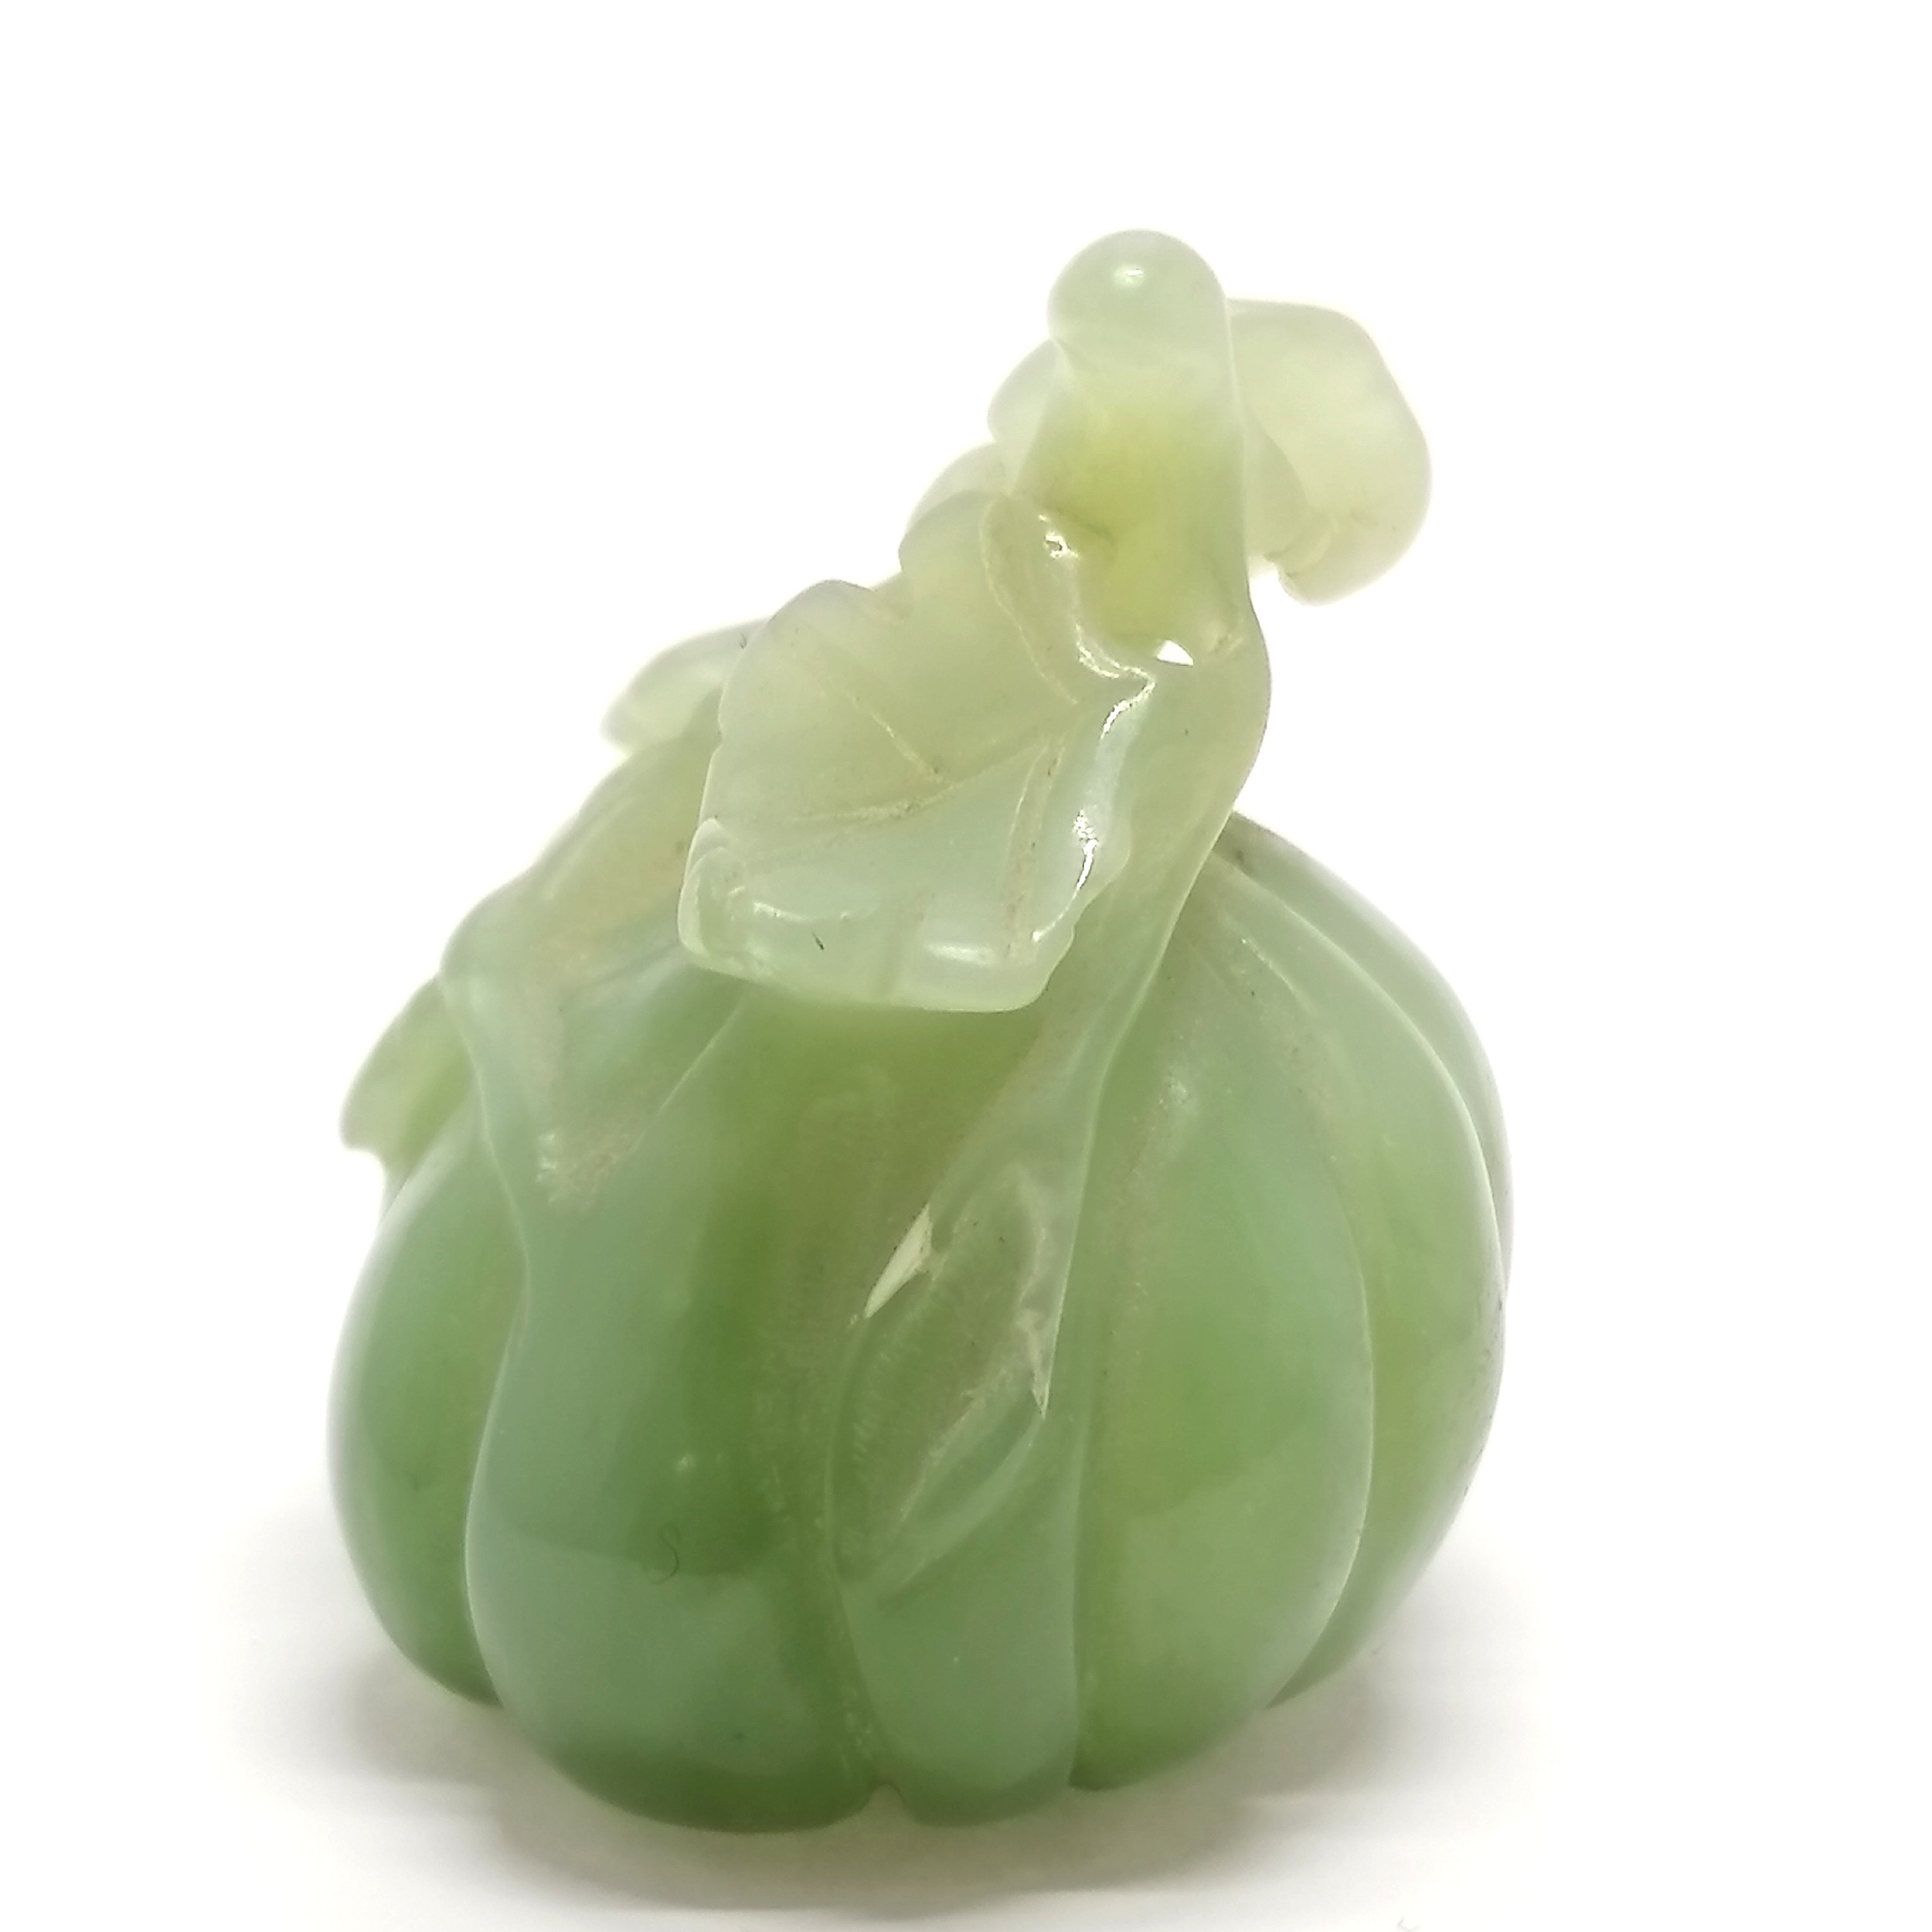 Oriental hand carved hardstone jade fruit with leaves - 4.5cm high & no obvious damage - Image 4 of 5